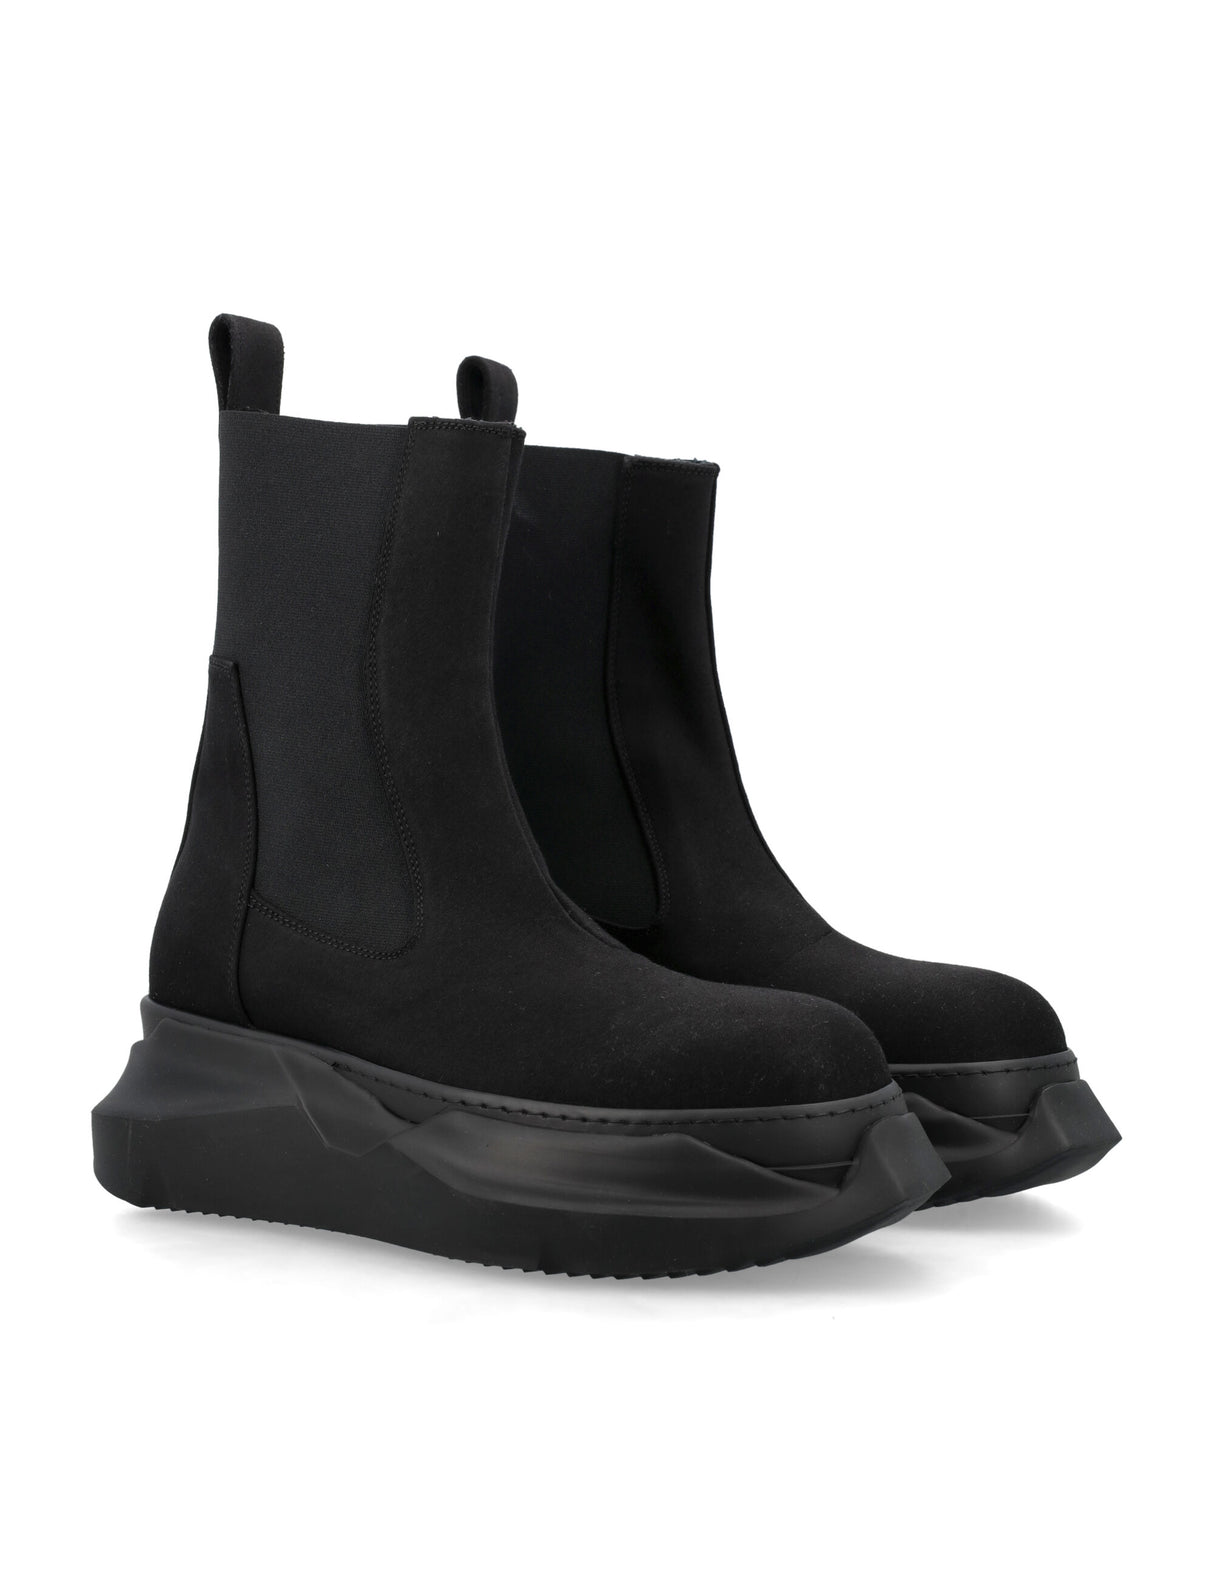 Men's Black Abstract Beatle Boot by Rick Owens DRKSHDW